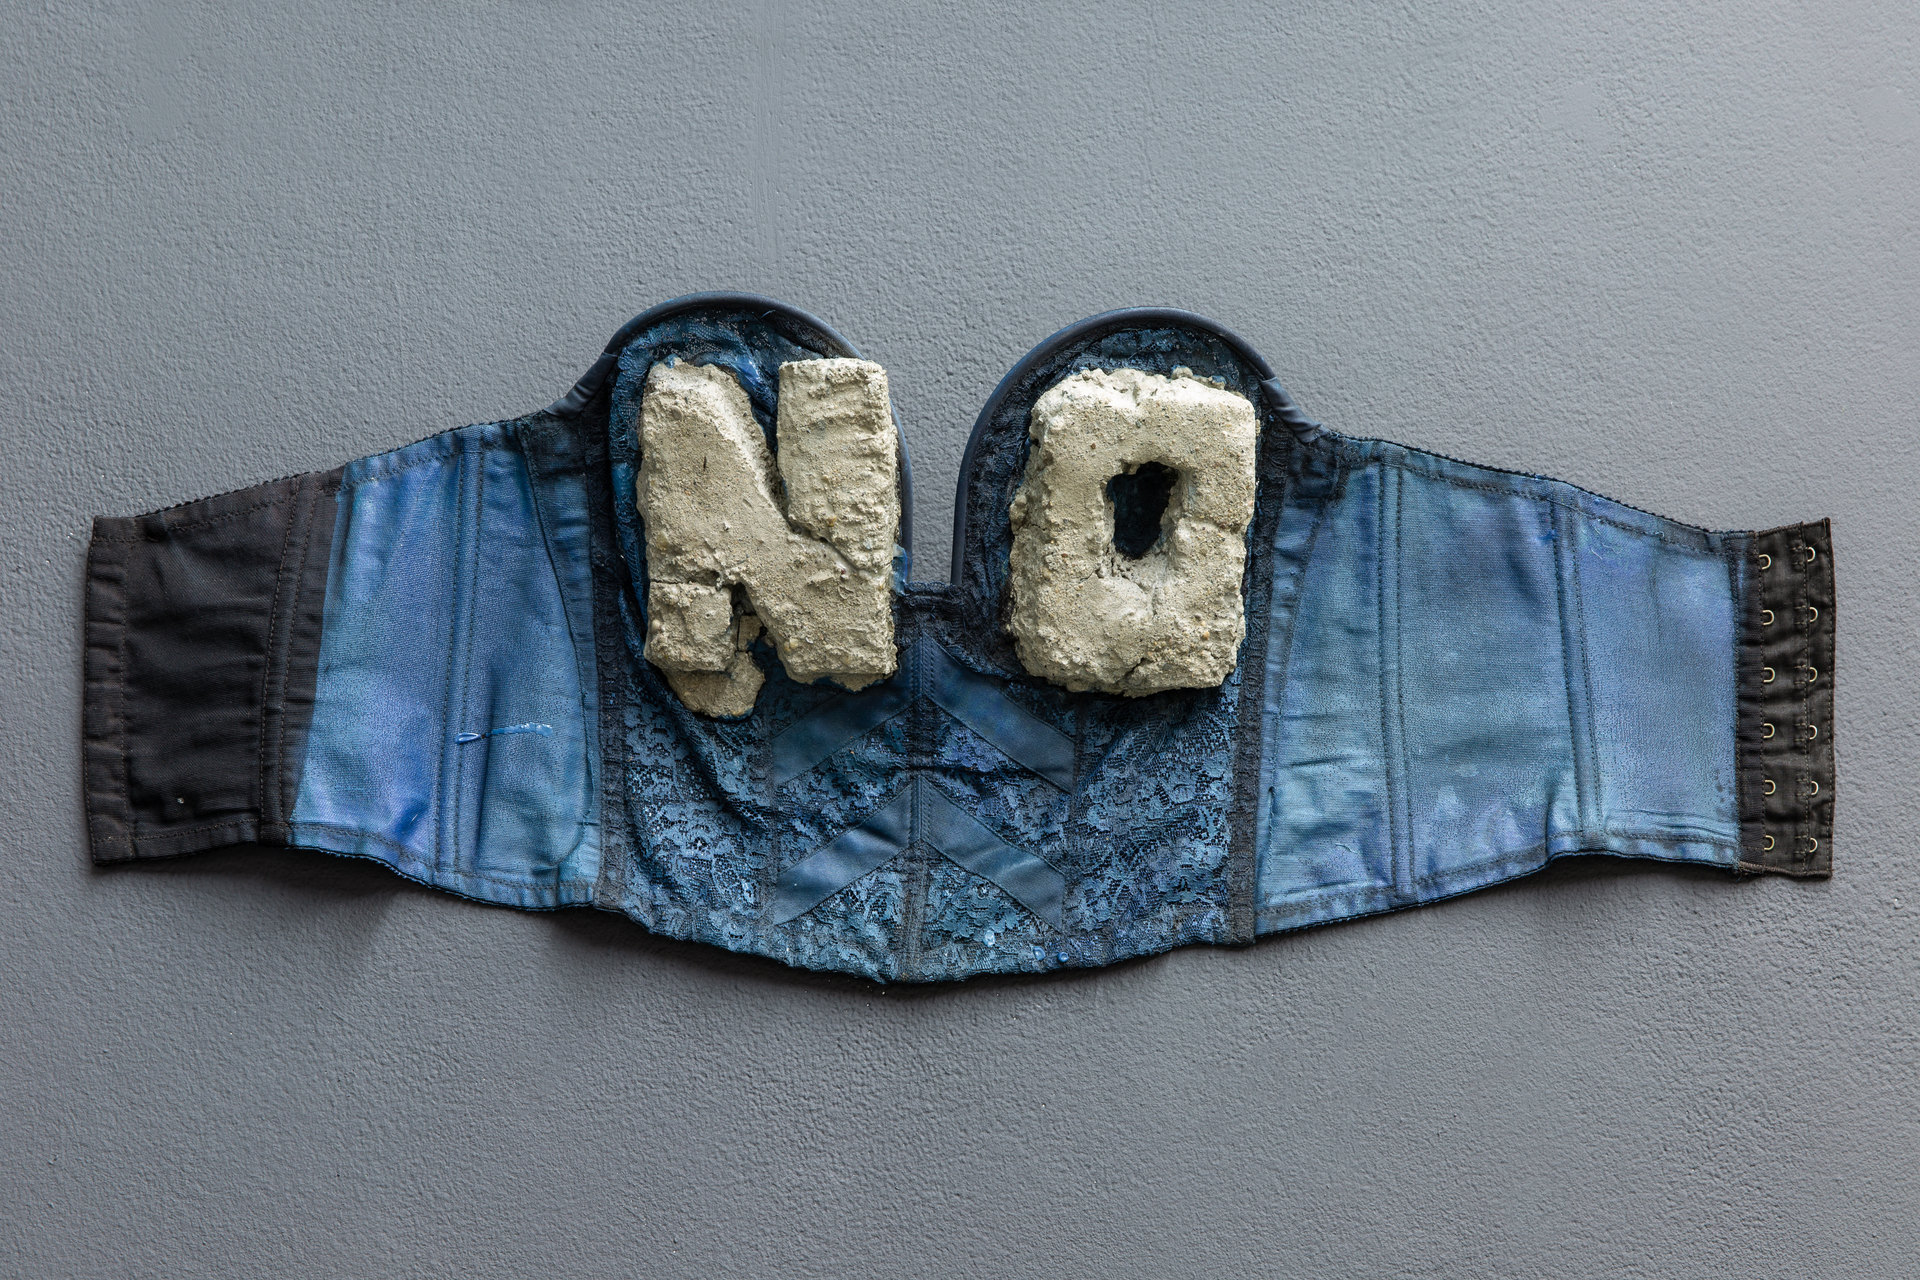 Boris Lurie, 'NO Bra (NOs cast in cement)', c. 1972–1974, Bra with concrete, 37 x 79 x 6cm, Shit and Doom - NO!art, 2019, Cell Project Space 